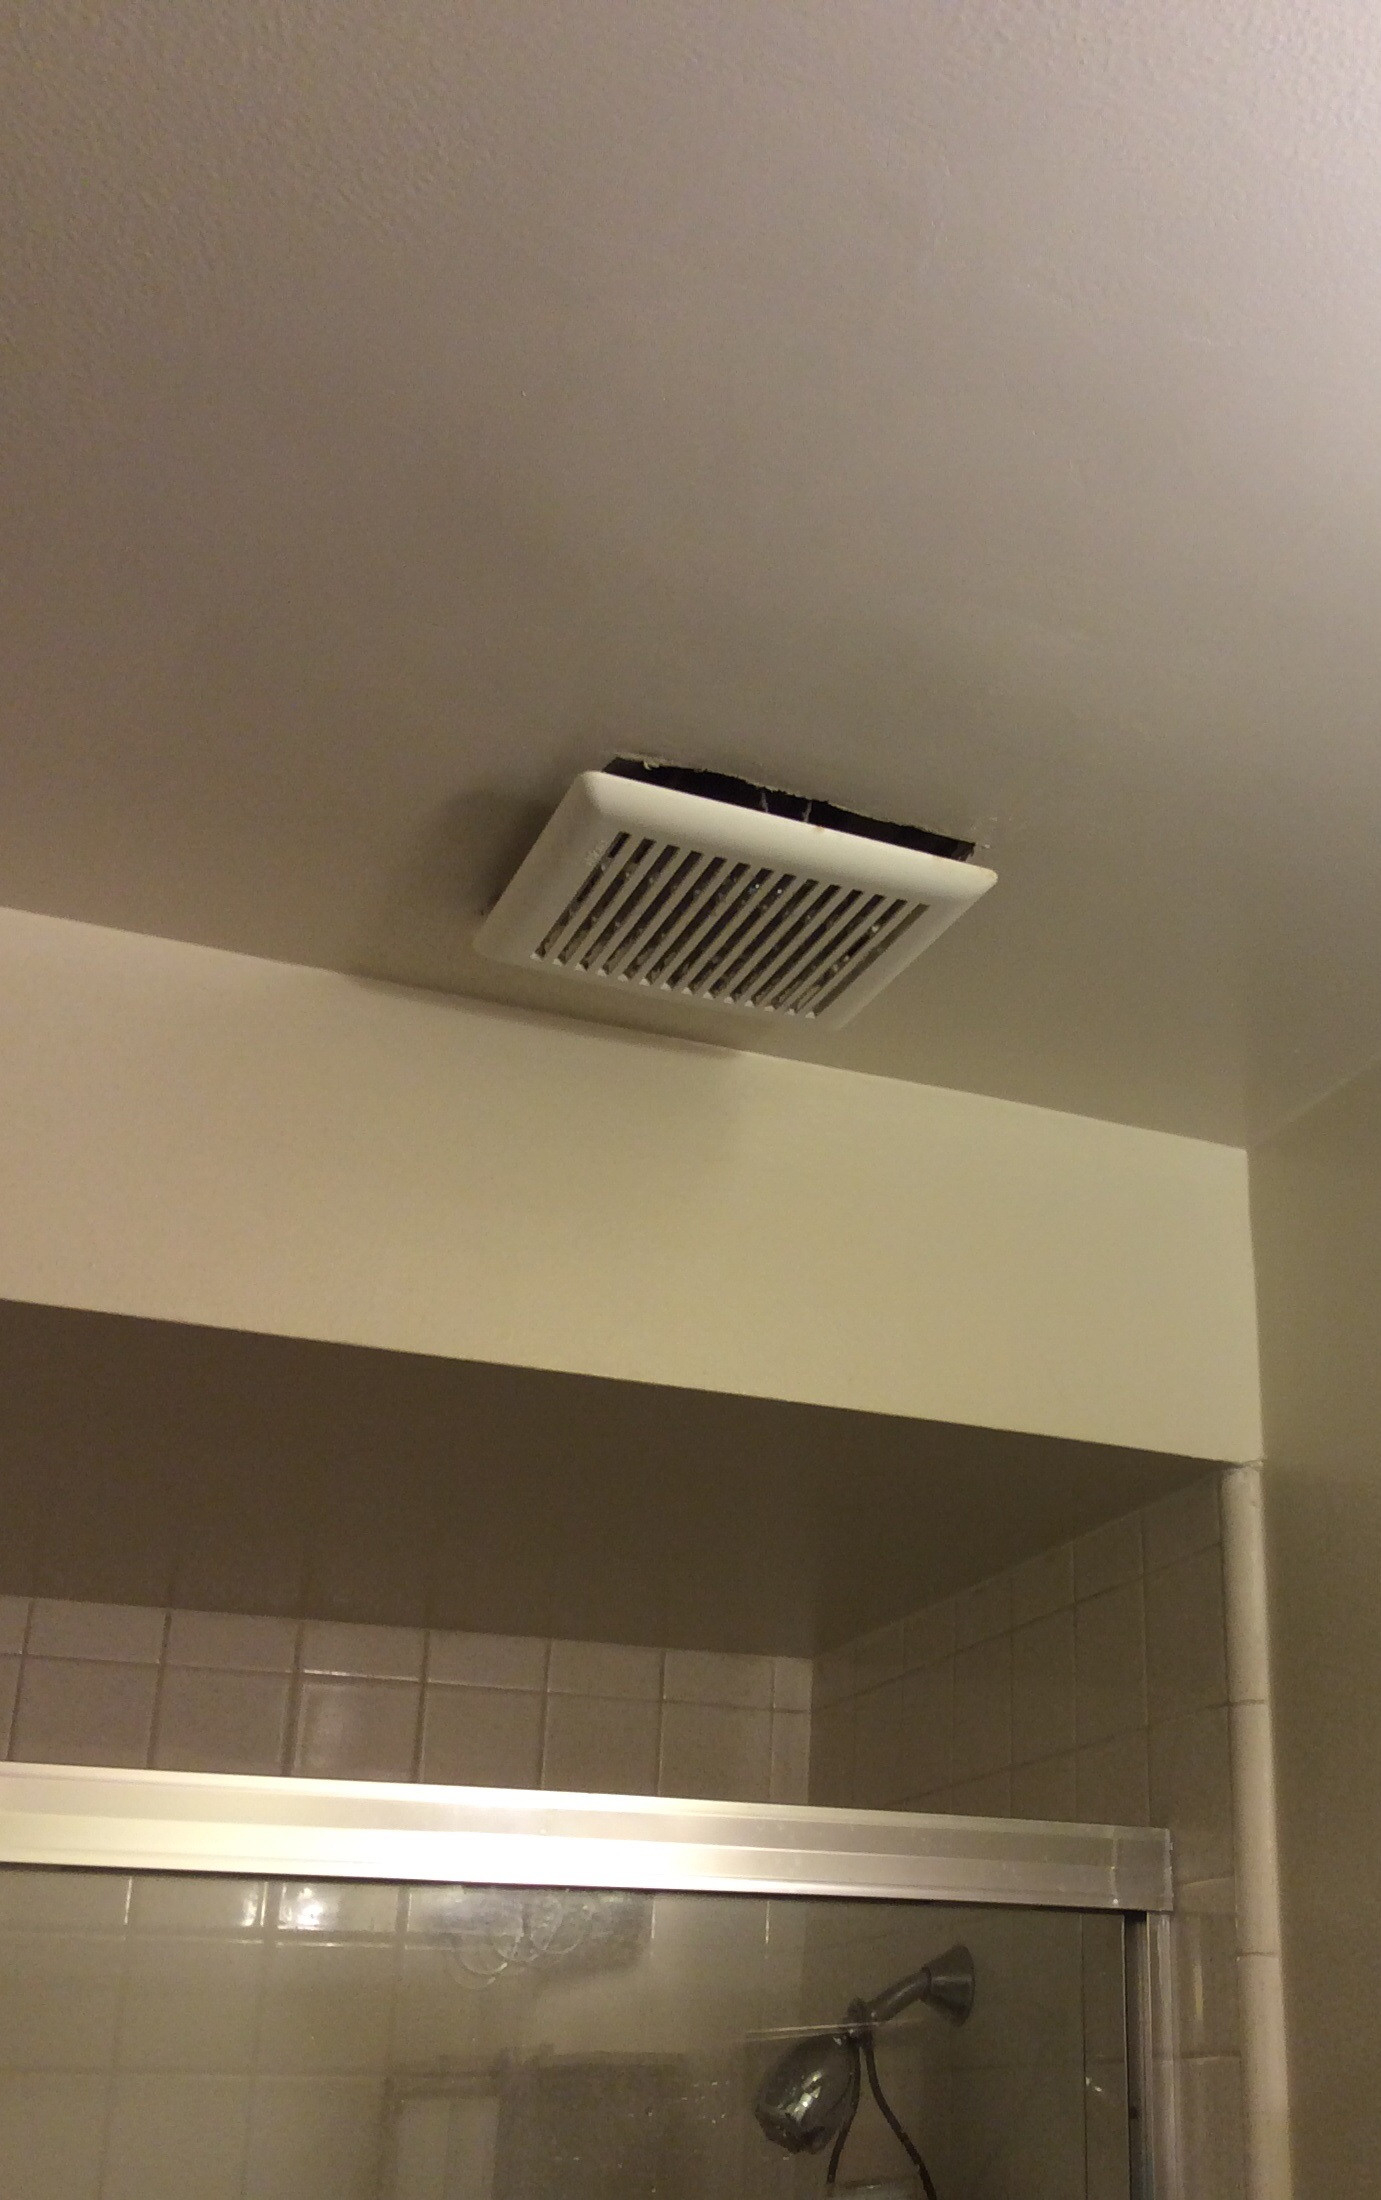 Is It Normal For An Exhaust Fan Cover To Hang Below The with sizing 1381 X 2200